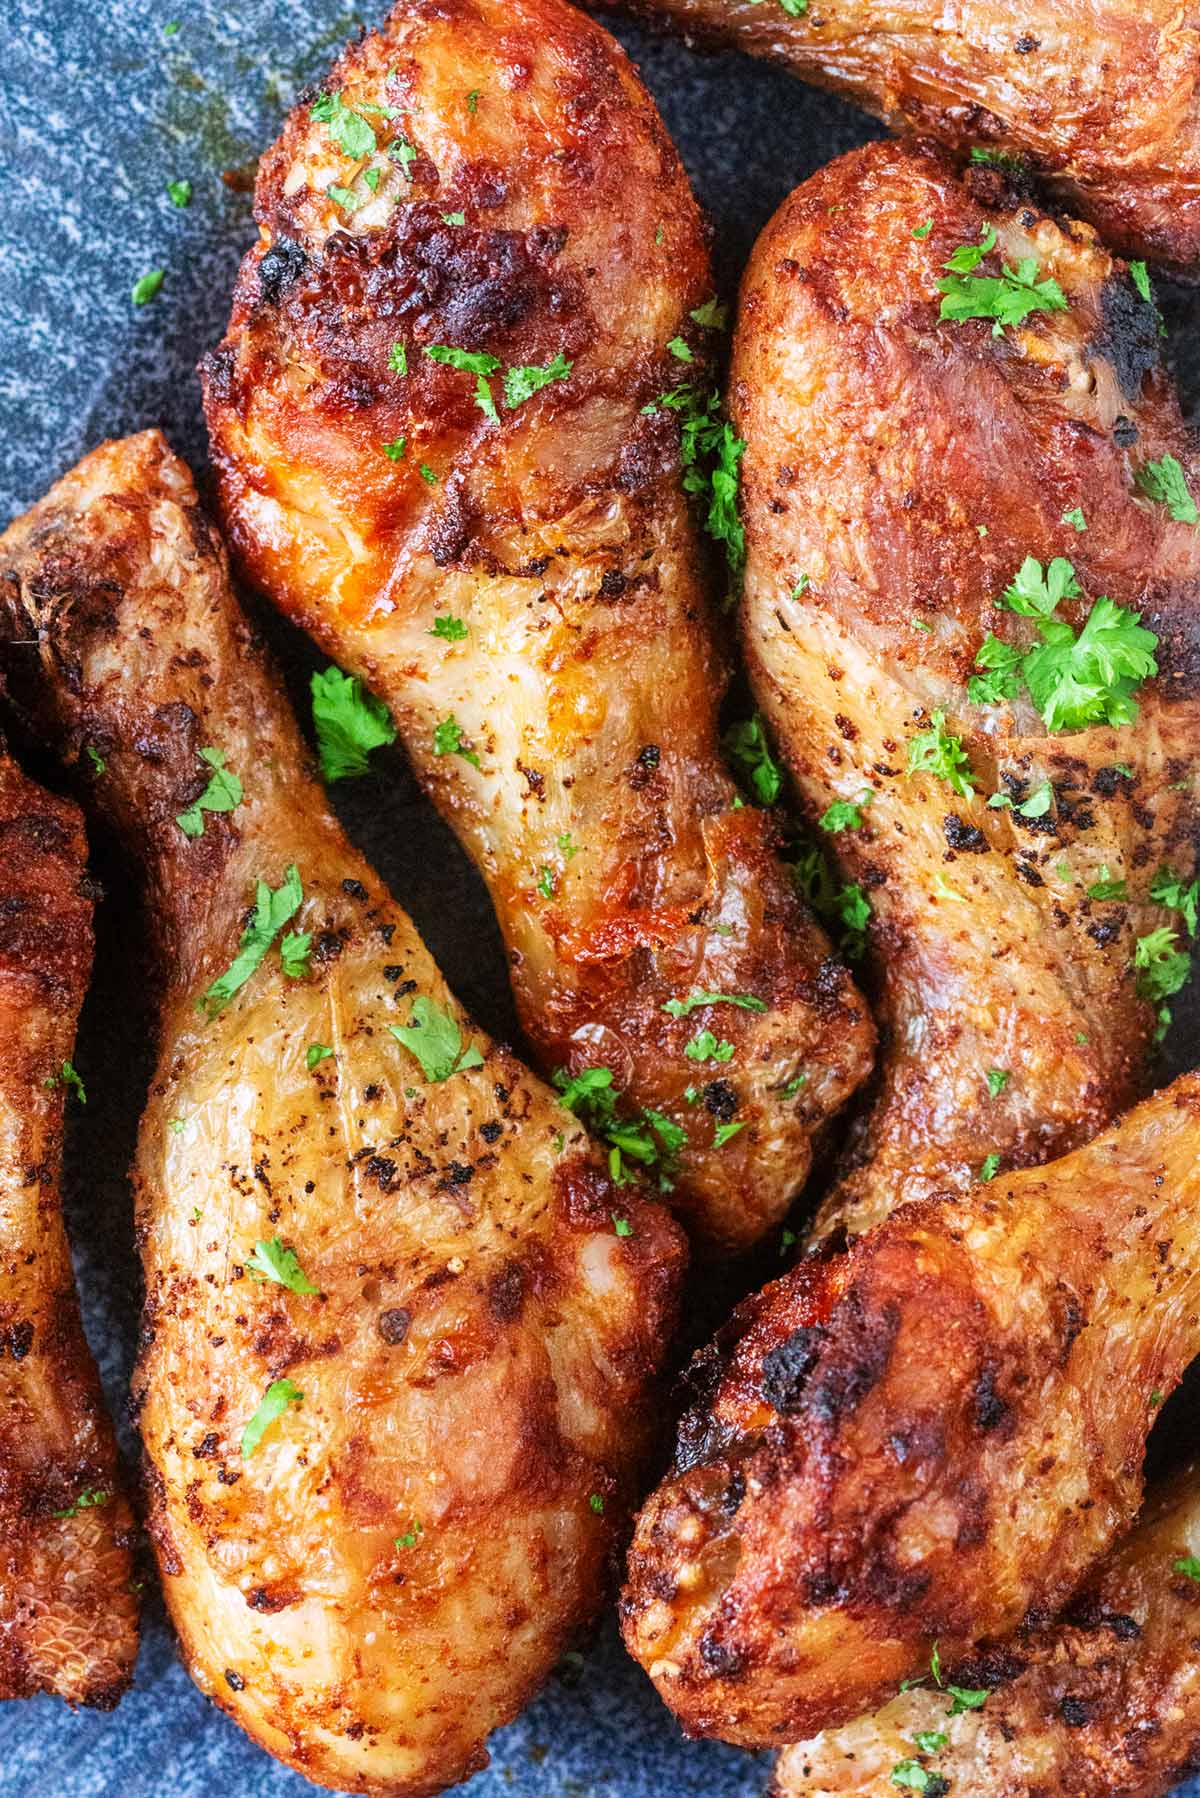 Cooked chicken drumsticks with chopped herbs sprinkled on them.